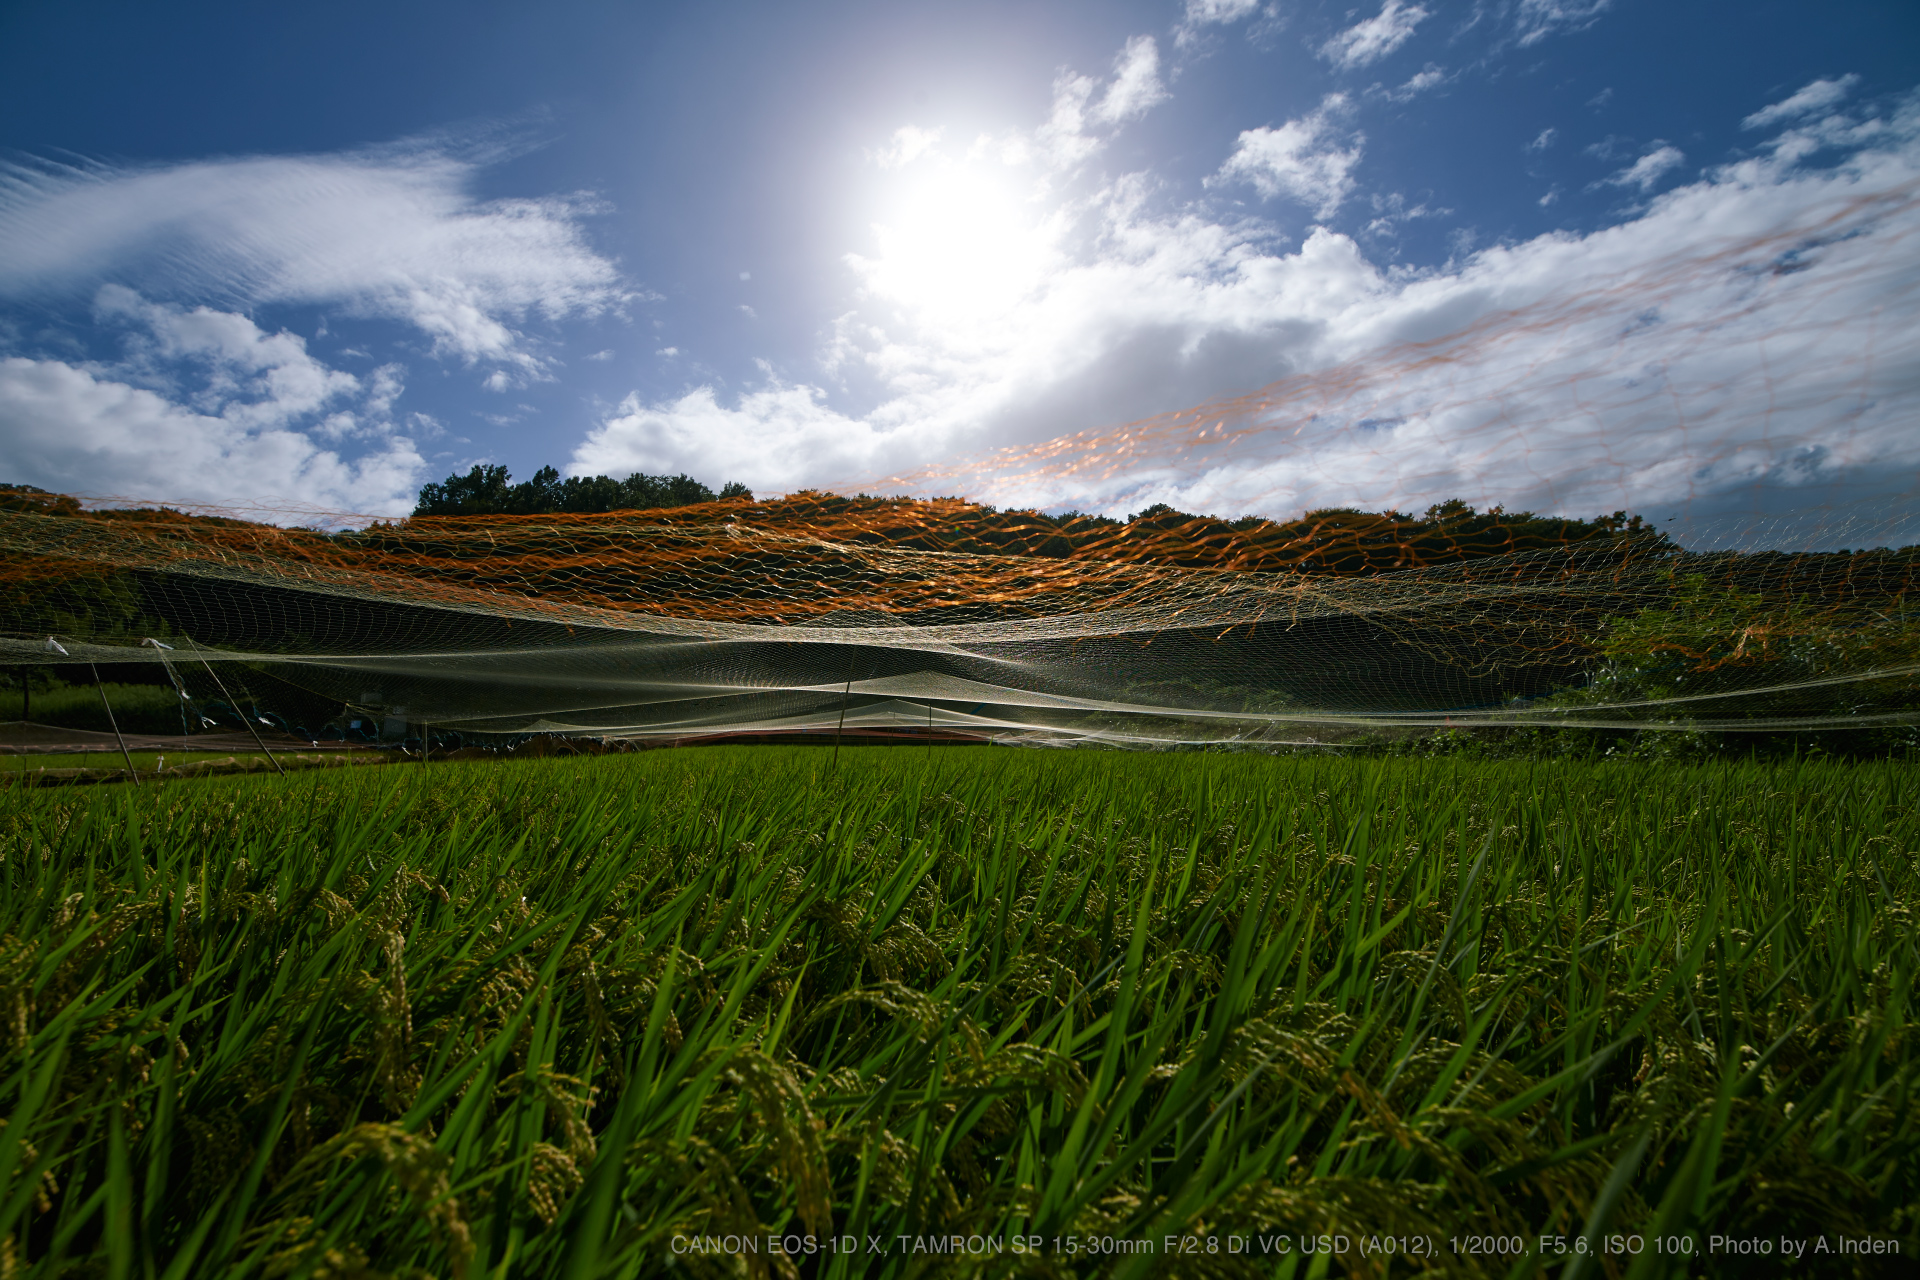 CANON EOS-1D X, TAMRON SP 15-30mm F/2.8 Di VC USD Model A012, 1/2000, F5.6, ISO 100, Photo by A.Inden